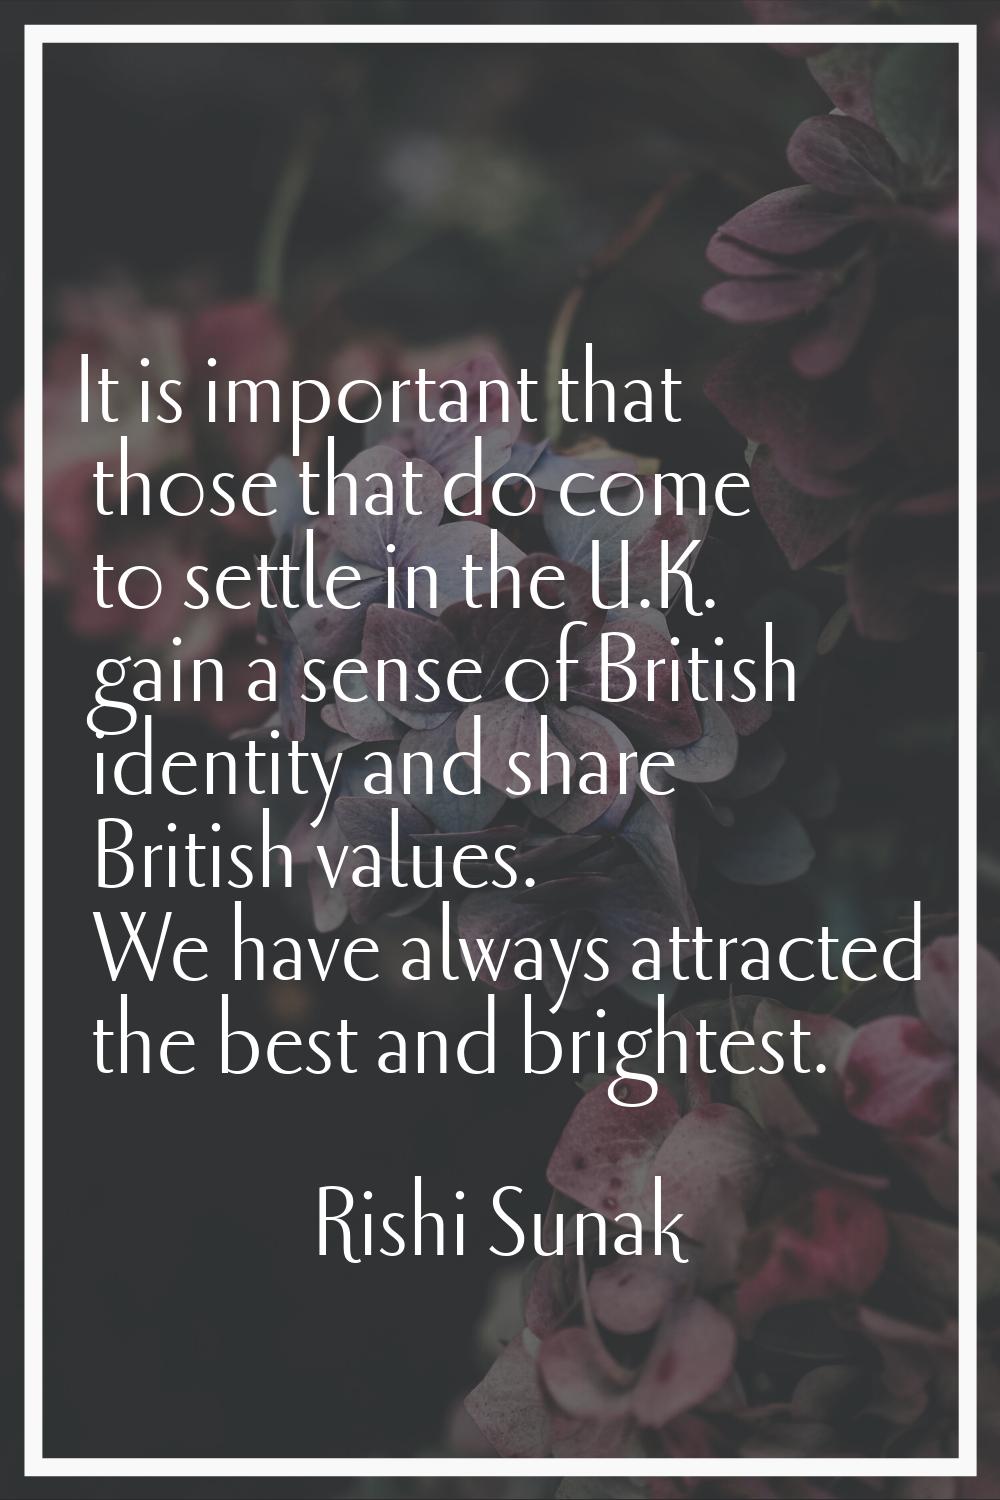 It is important that those that do come to settle in the U.K. gain a sense of British identity and 